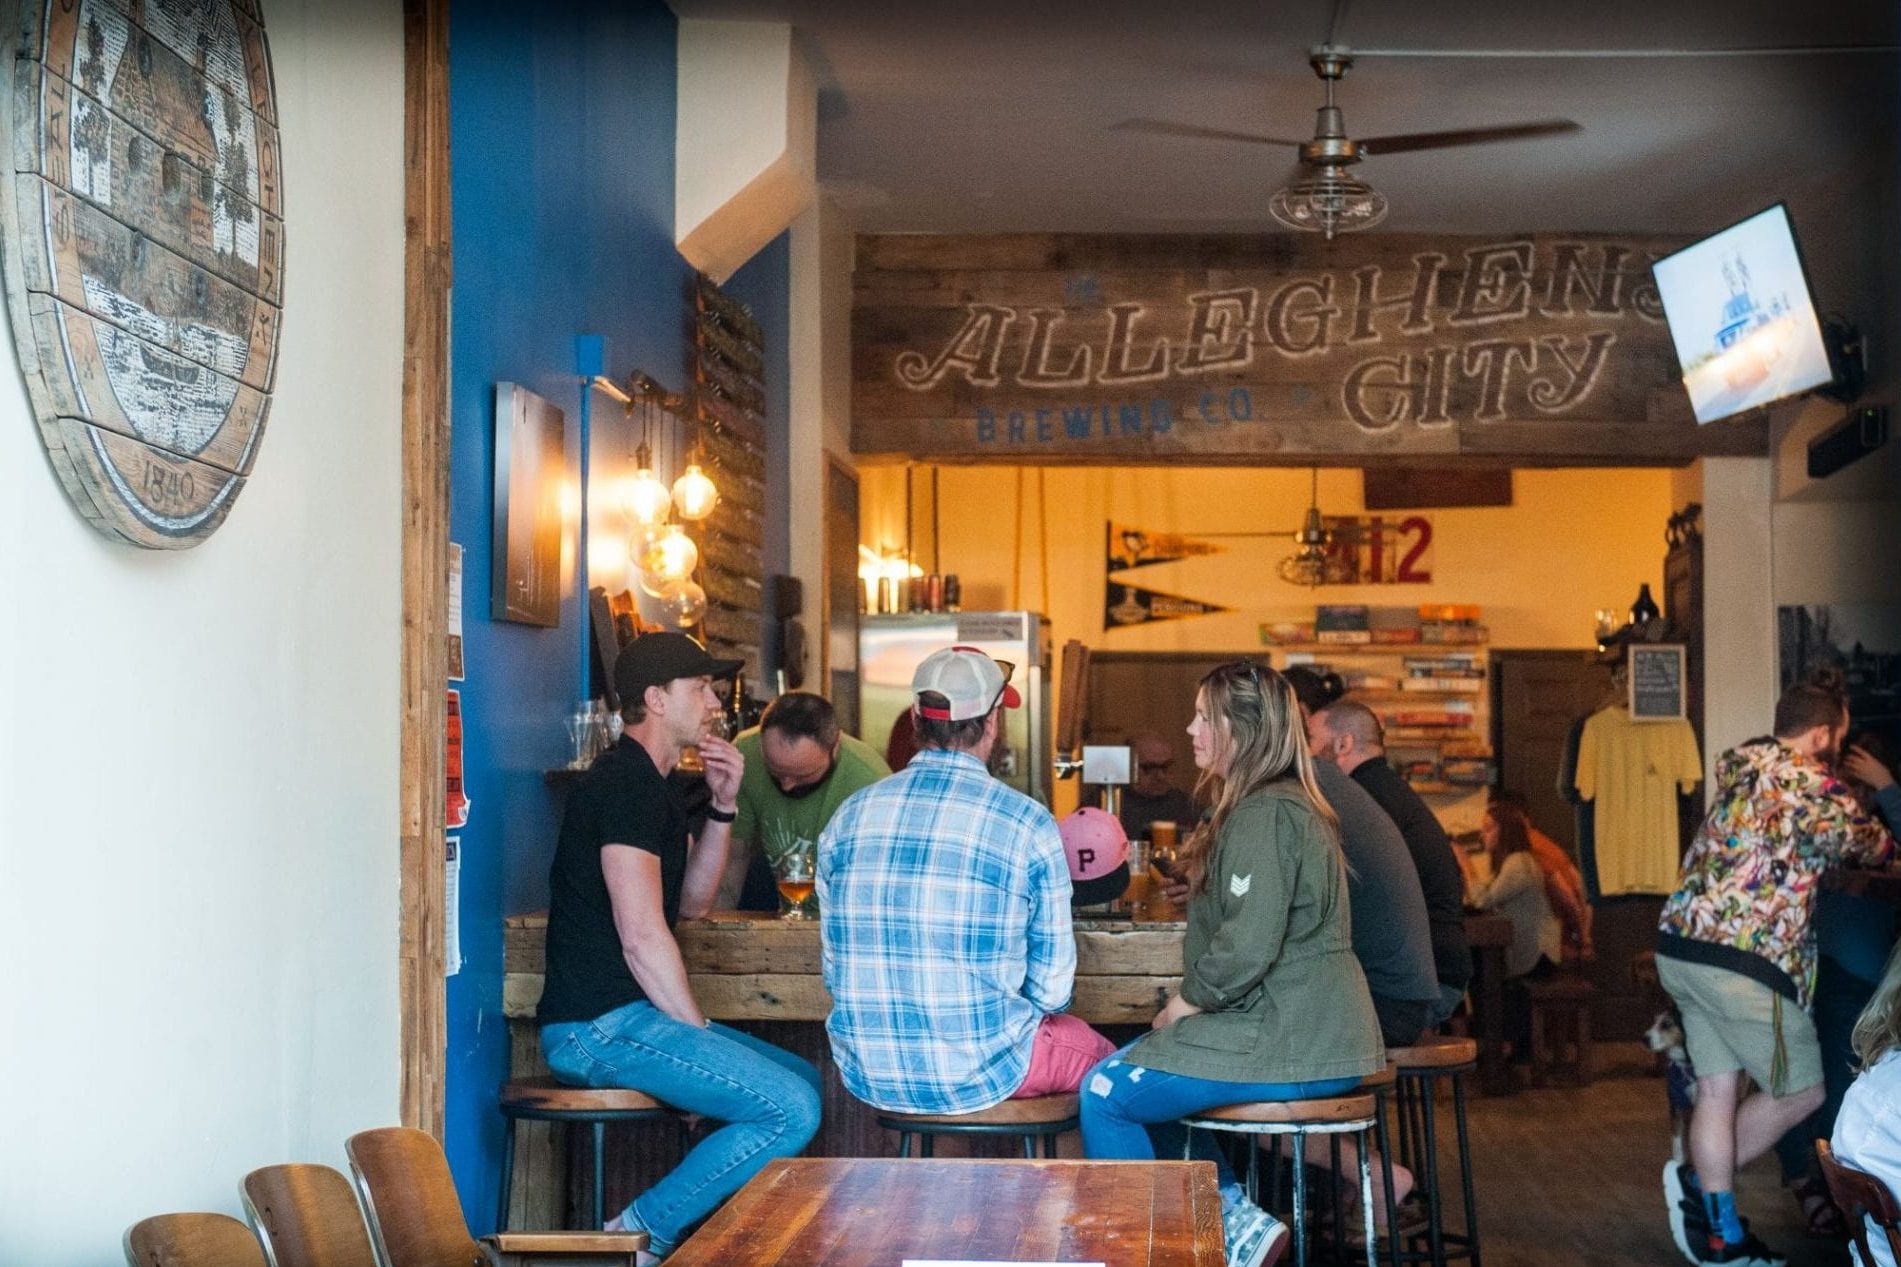 A group of brew tour guests sit inside Allegheny City's taproom in Pittsburgh, PA